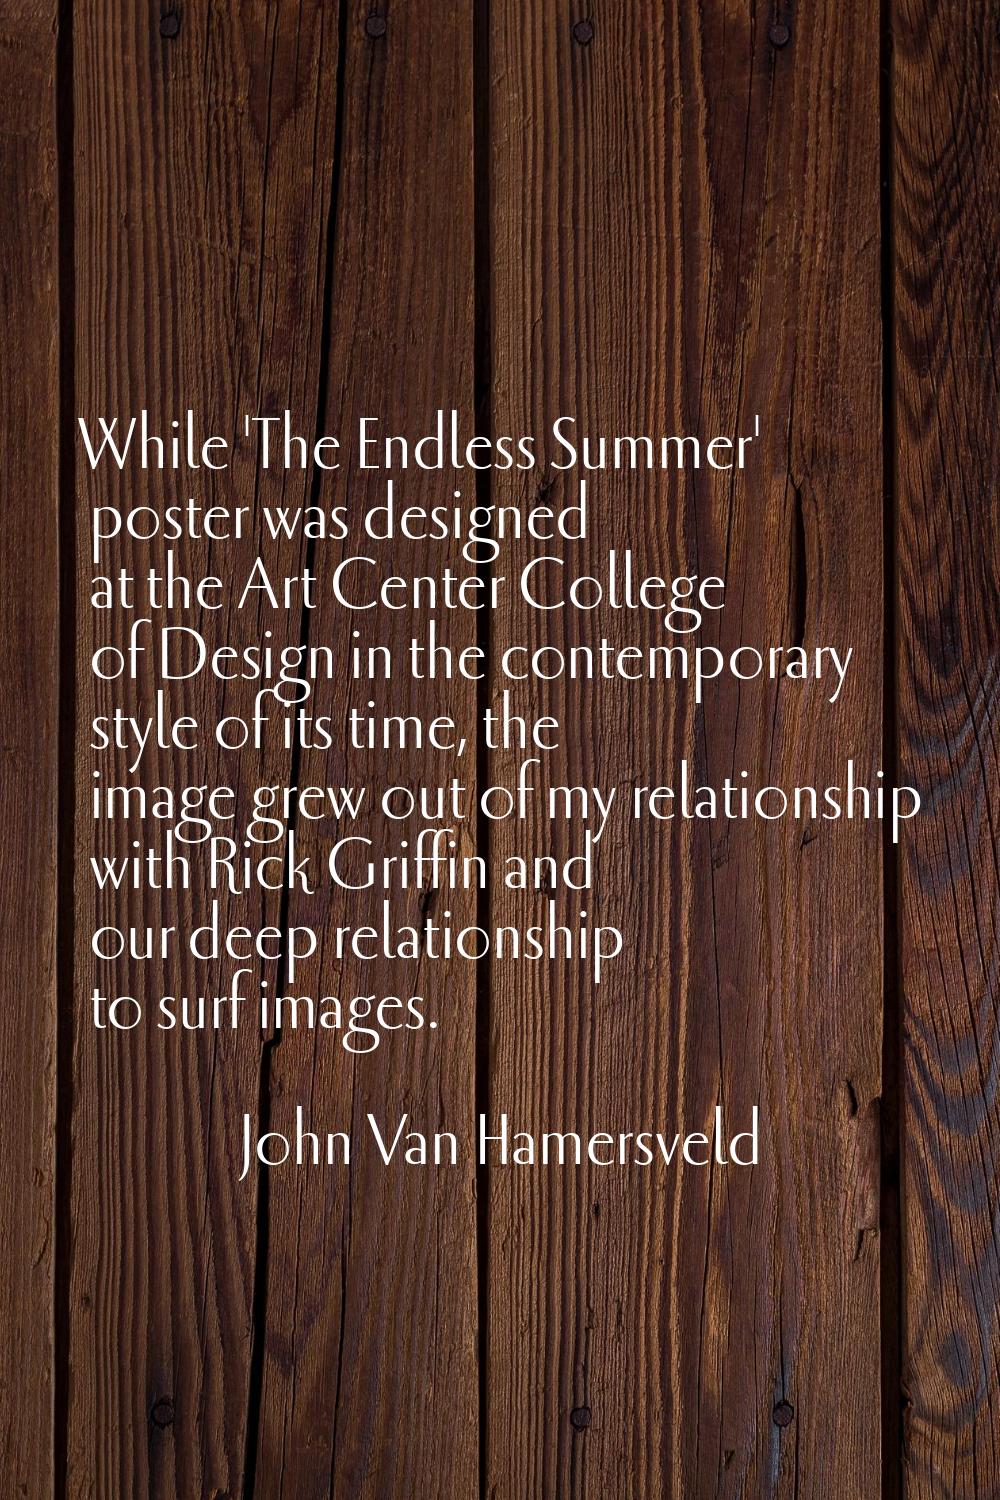 While 'The Endless Summer' poster was designed at the Art Center College of Design in the contempor